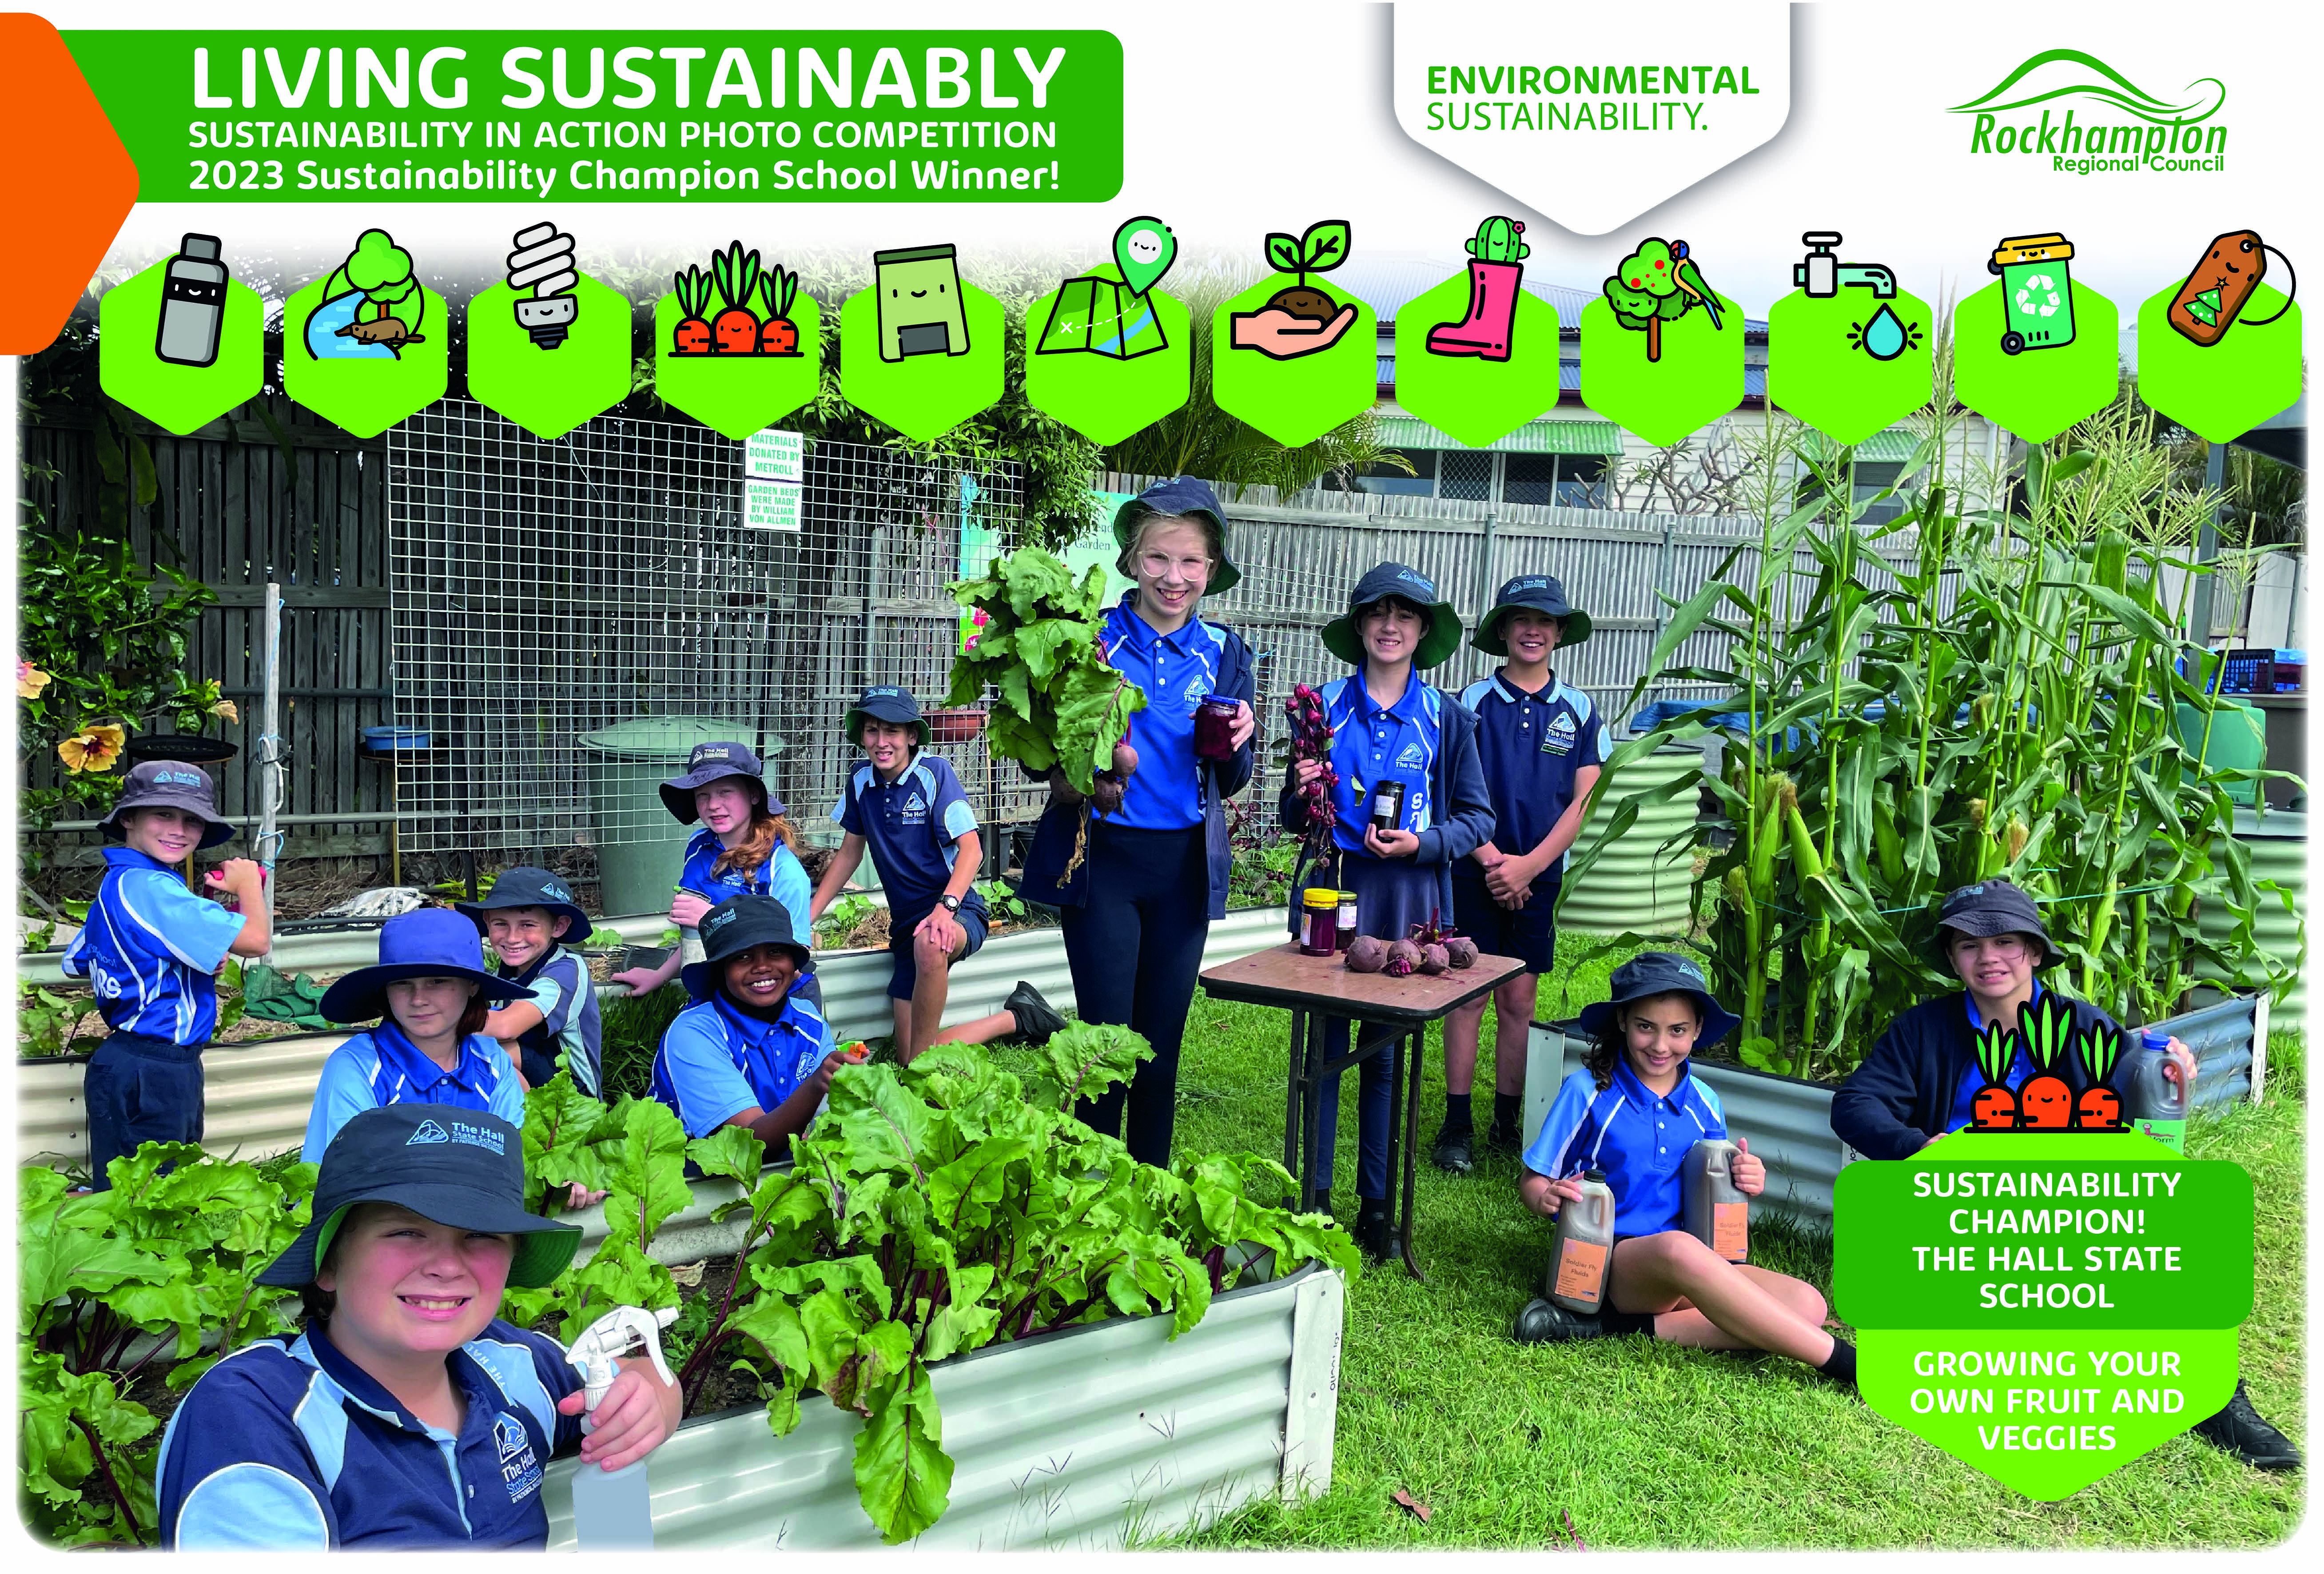 2023-SCHOOL-Sustainability-in-Action-Photo-Comp-The-Hall-State-School